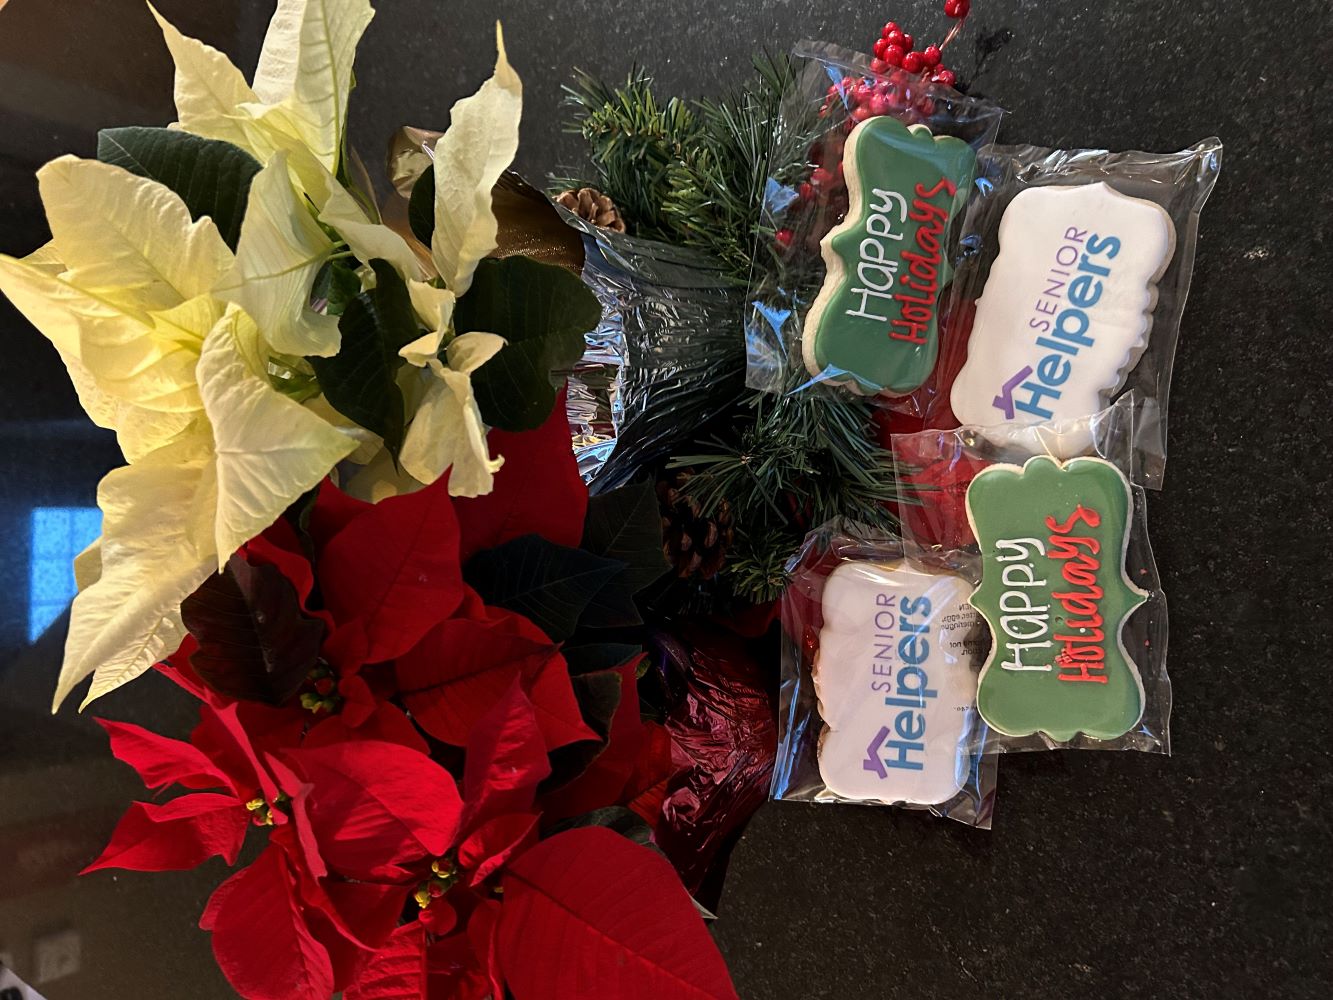 Happy Holidays from Senior Helpers Edina! We brought over poinsettias and cookies to our clients and family’s.